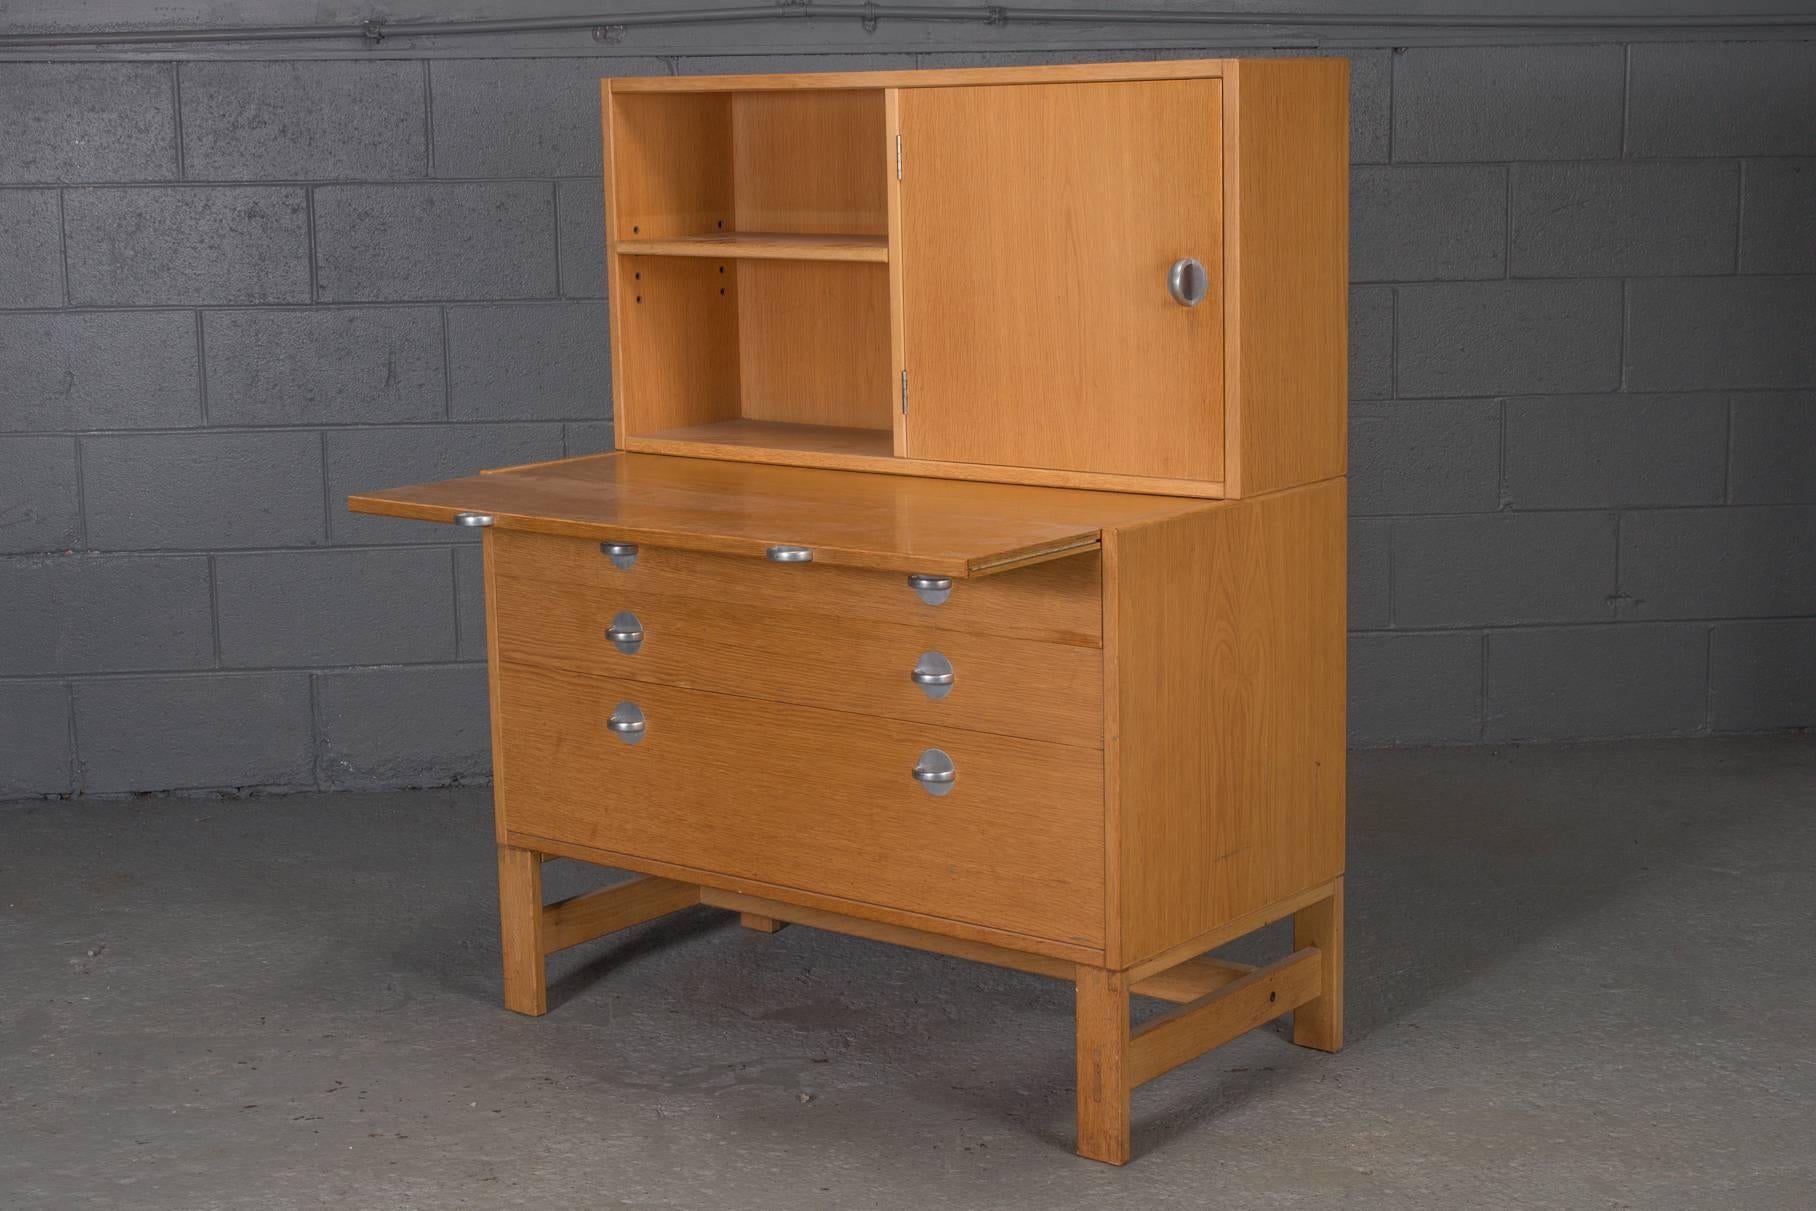 Oak bookcase unit and chest with stainless steel handles.